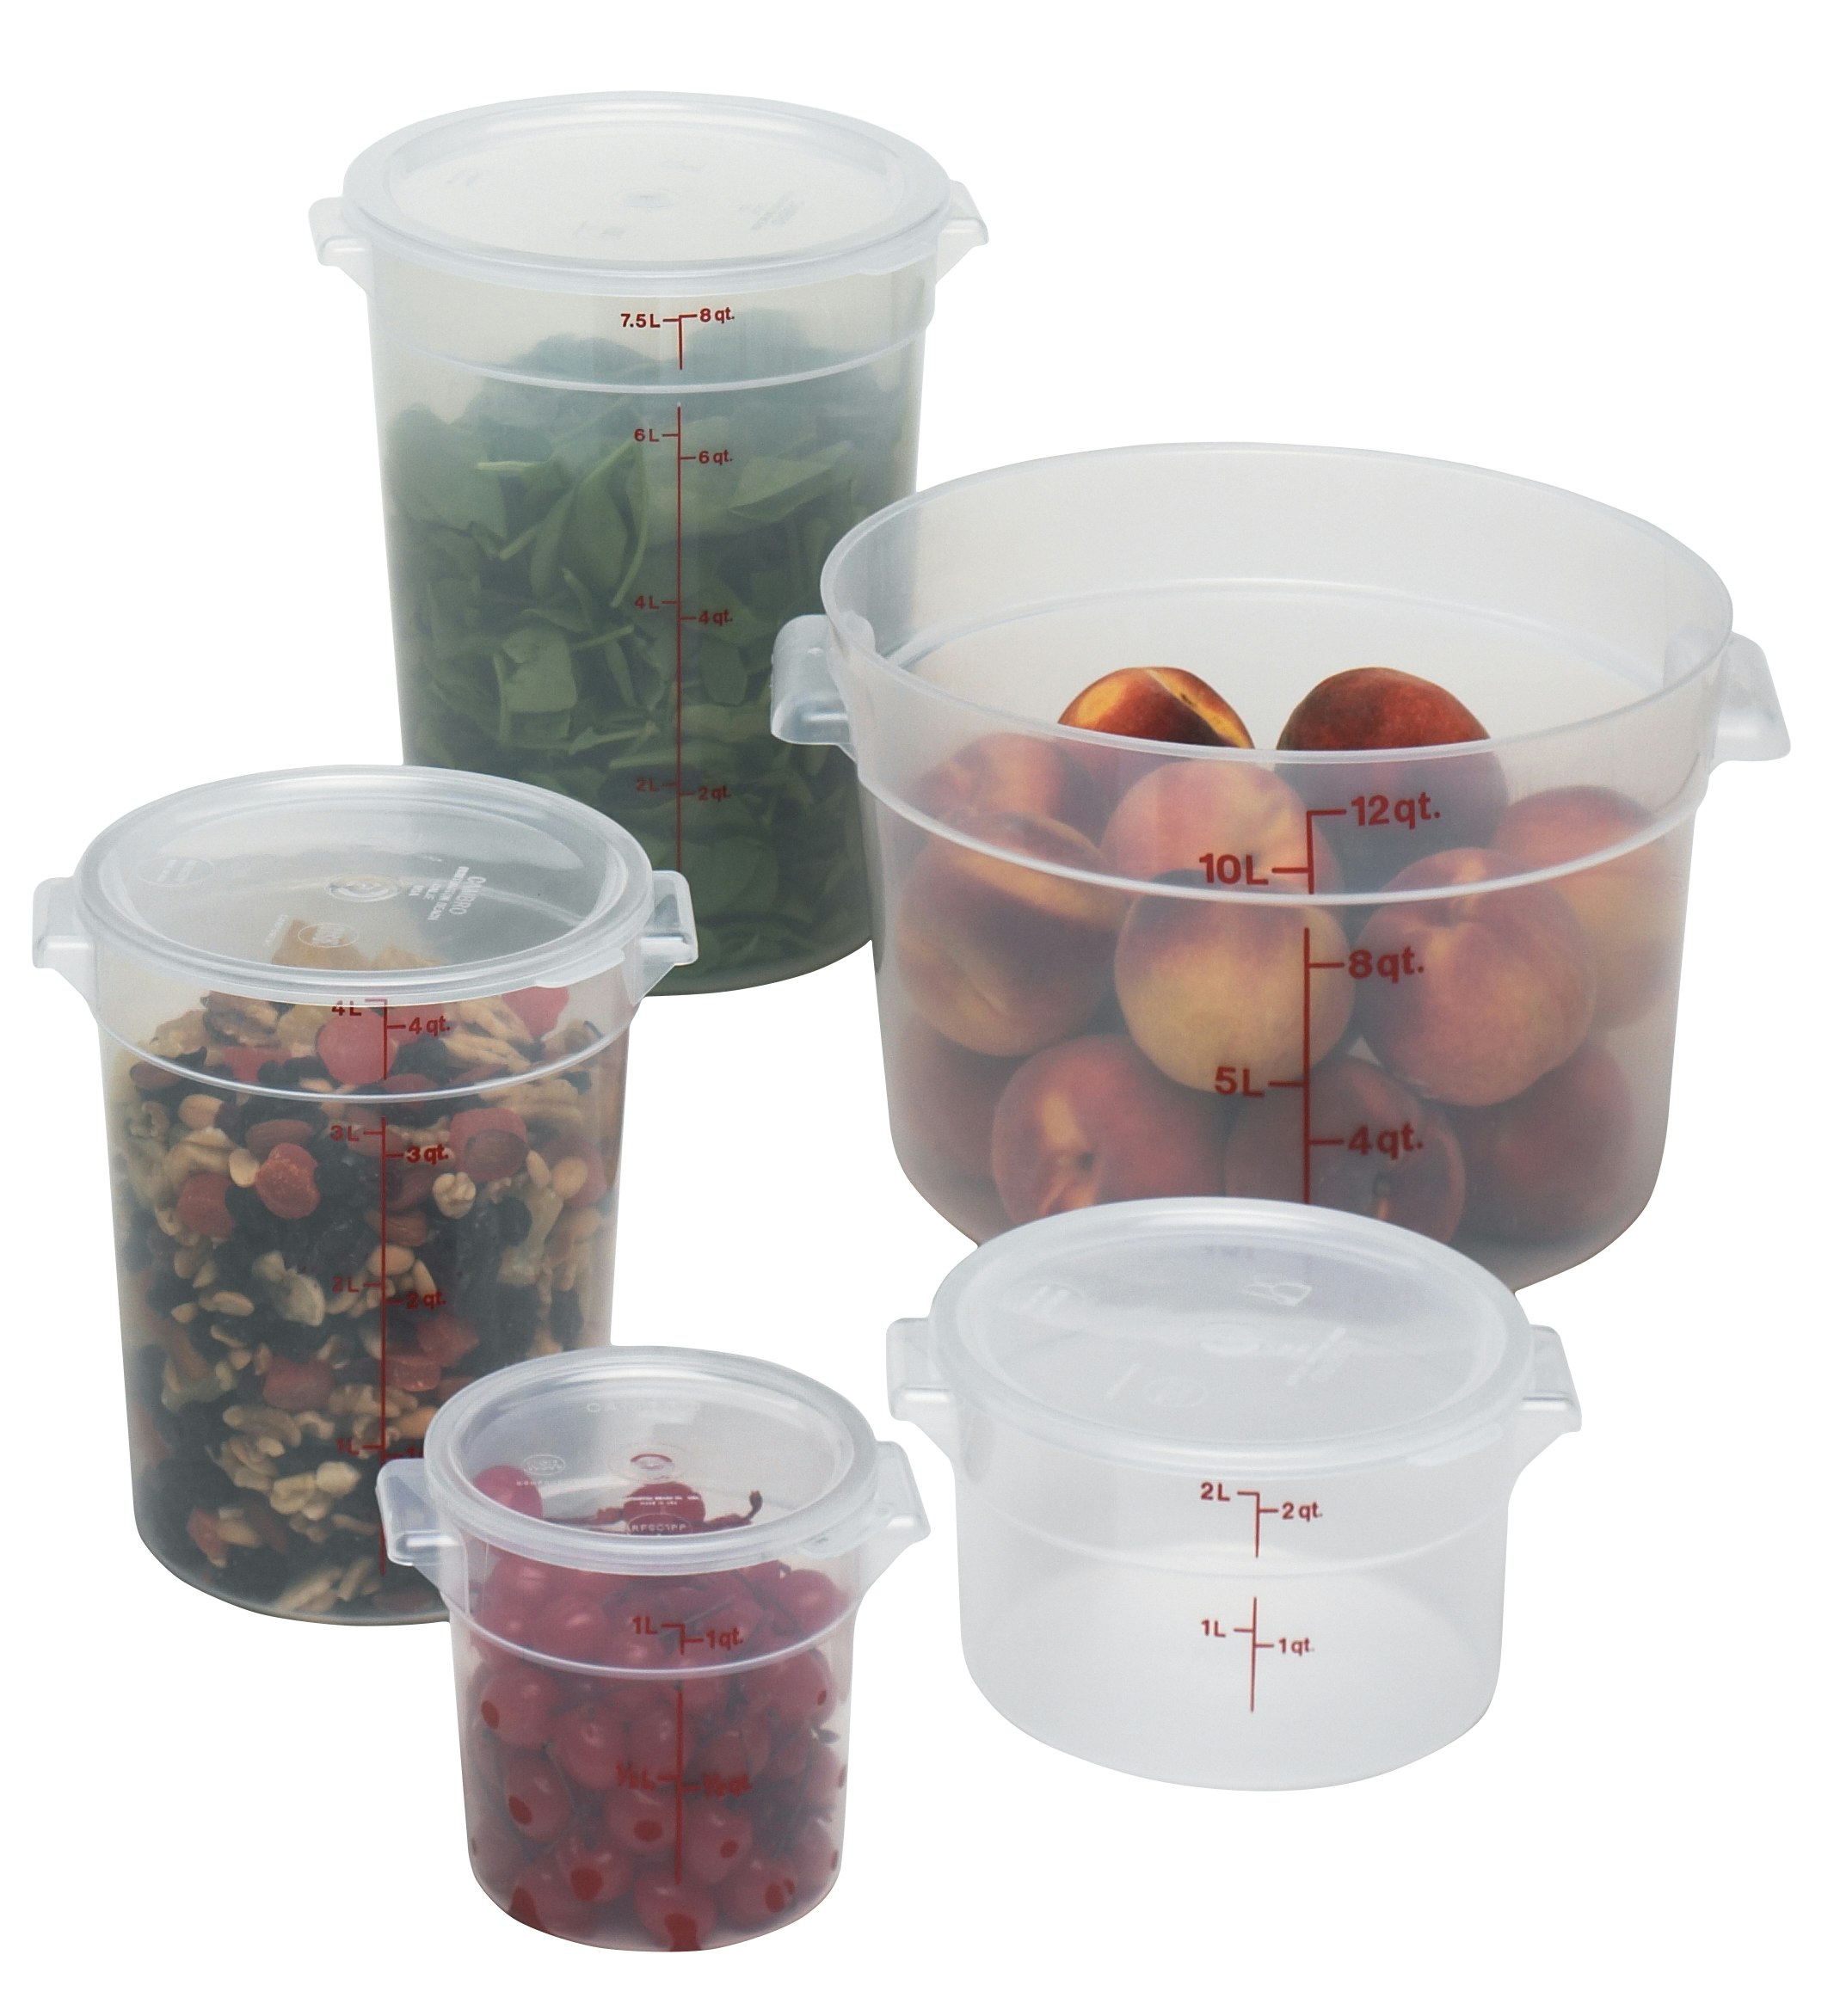 https://cambro-dam.imgix.net/PU0DO3EZ/as/plg64h-gepbp4-7xa80c/Translucent_Rounds_with_Food.jpg?dl